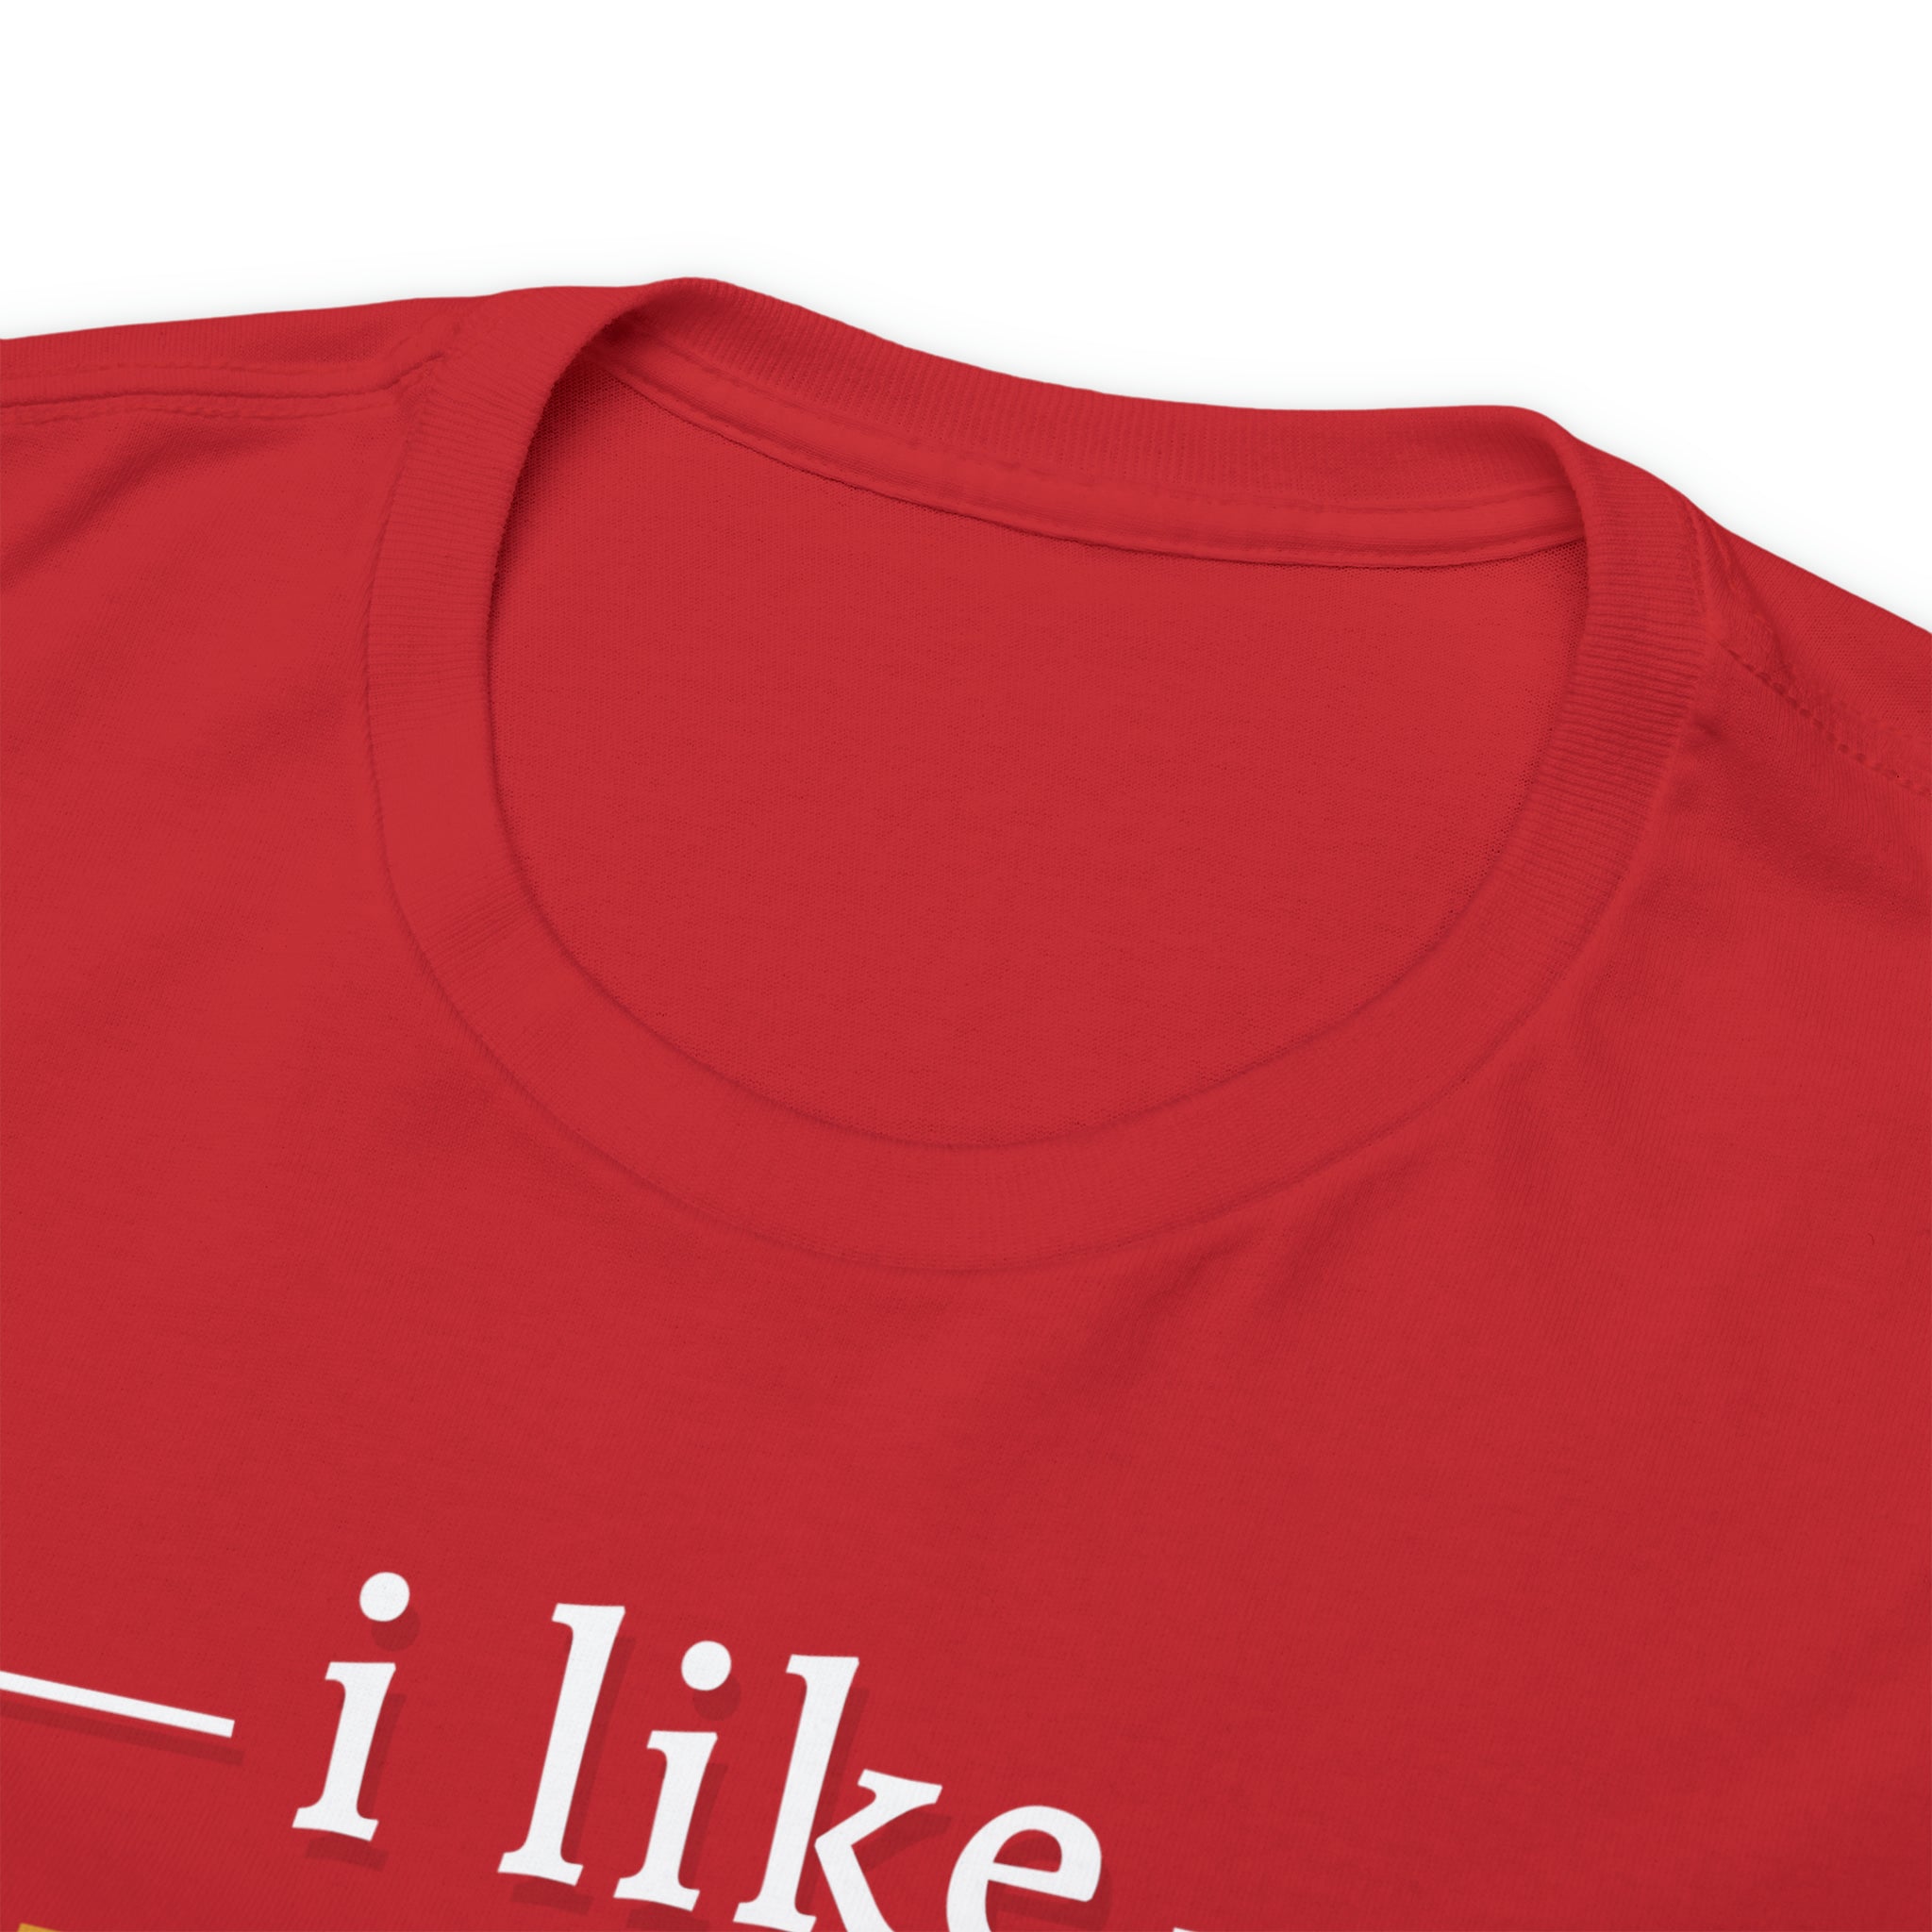 I Like Chai Tea and Maybe 3 People T-Shirt Design by C&C